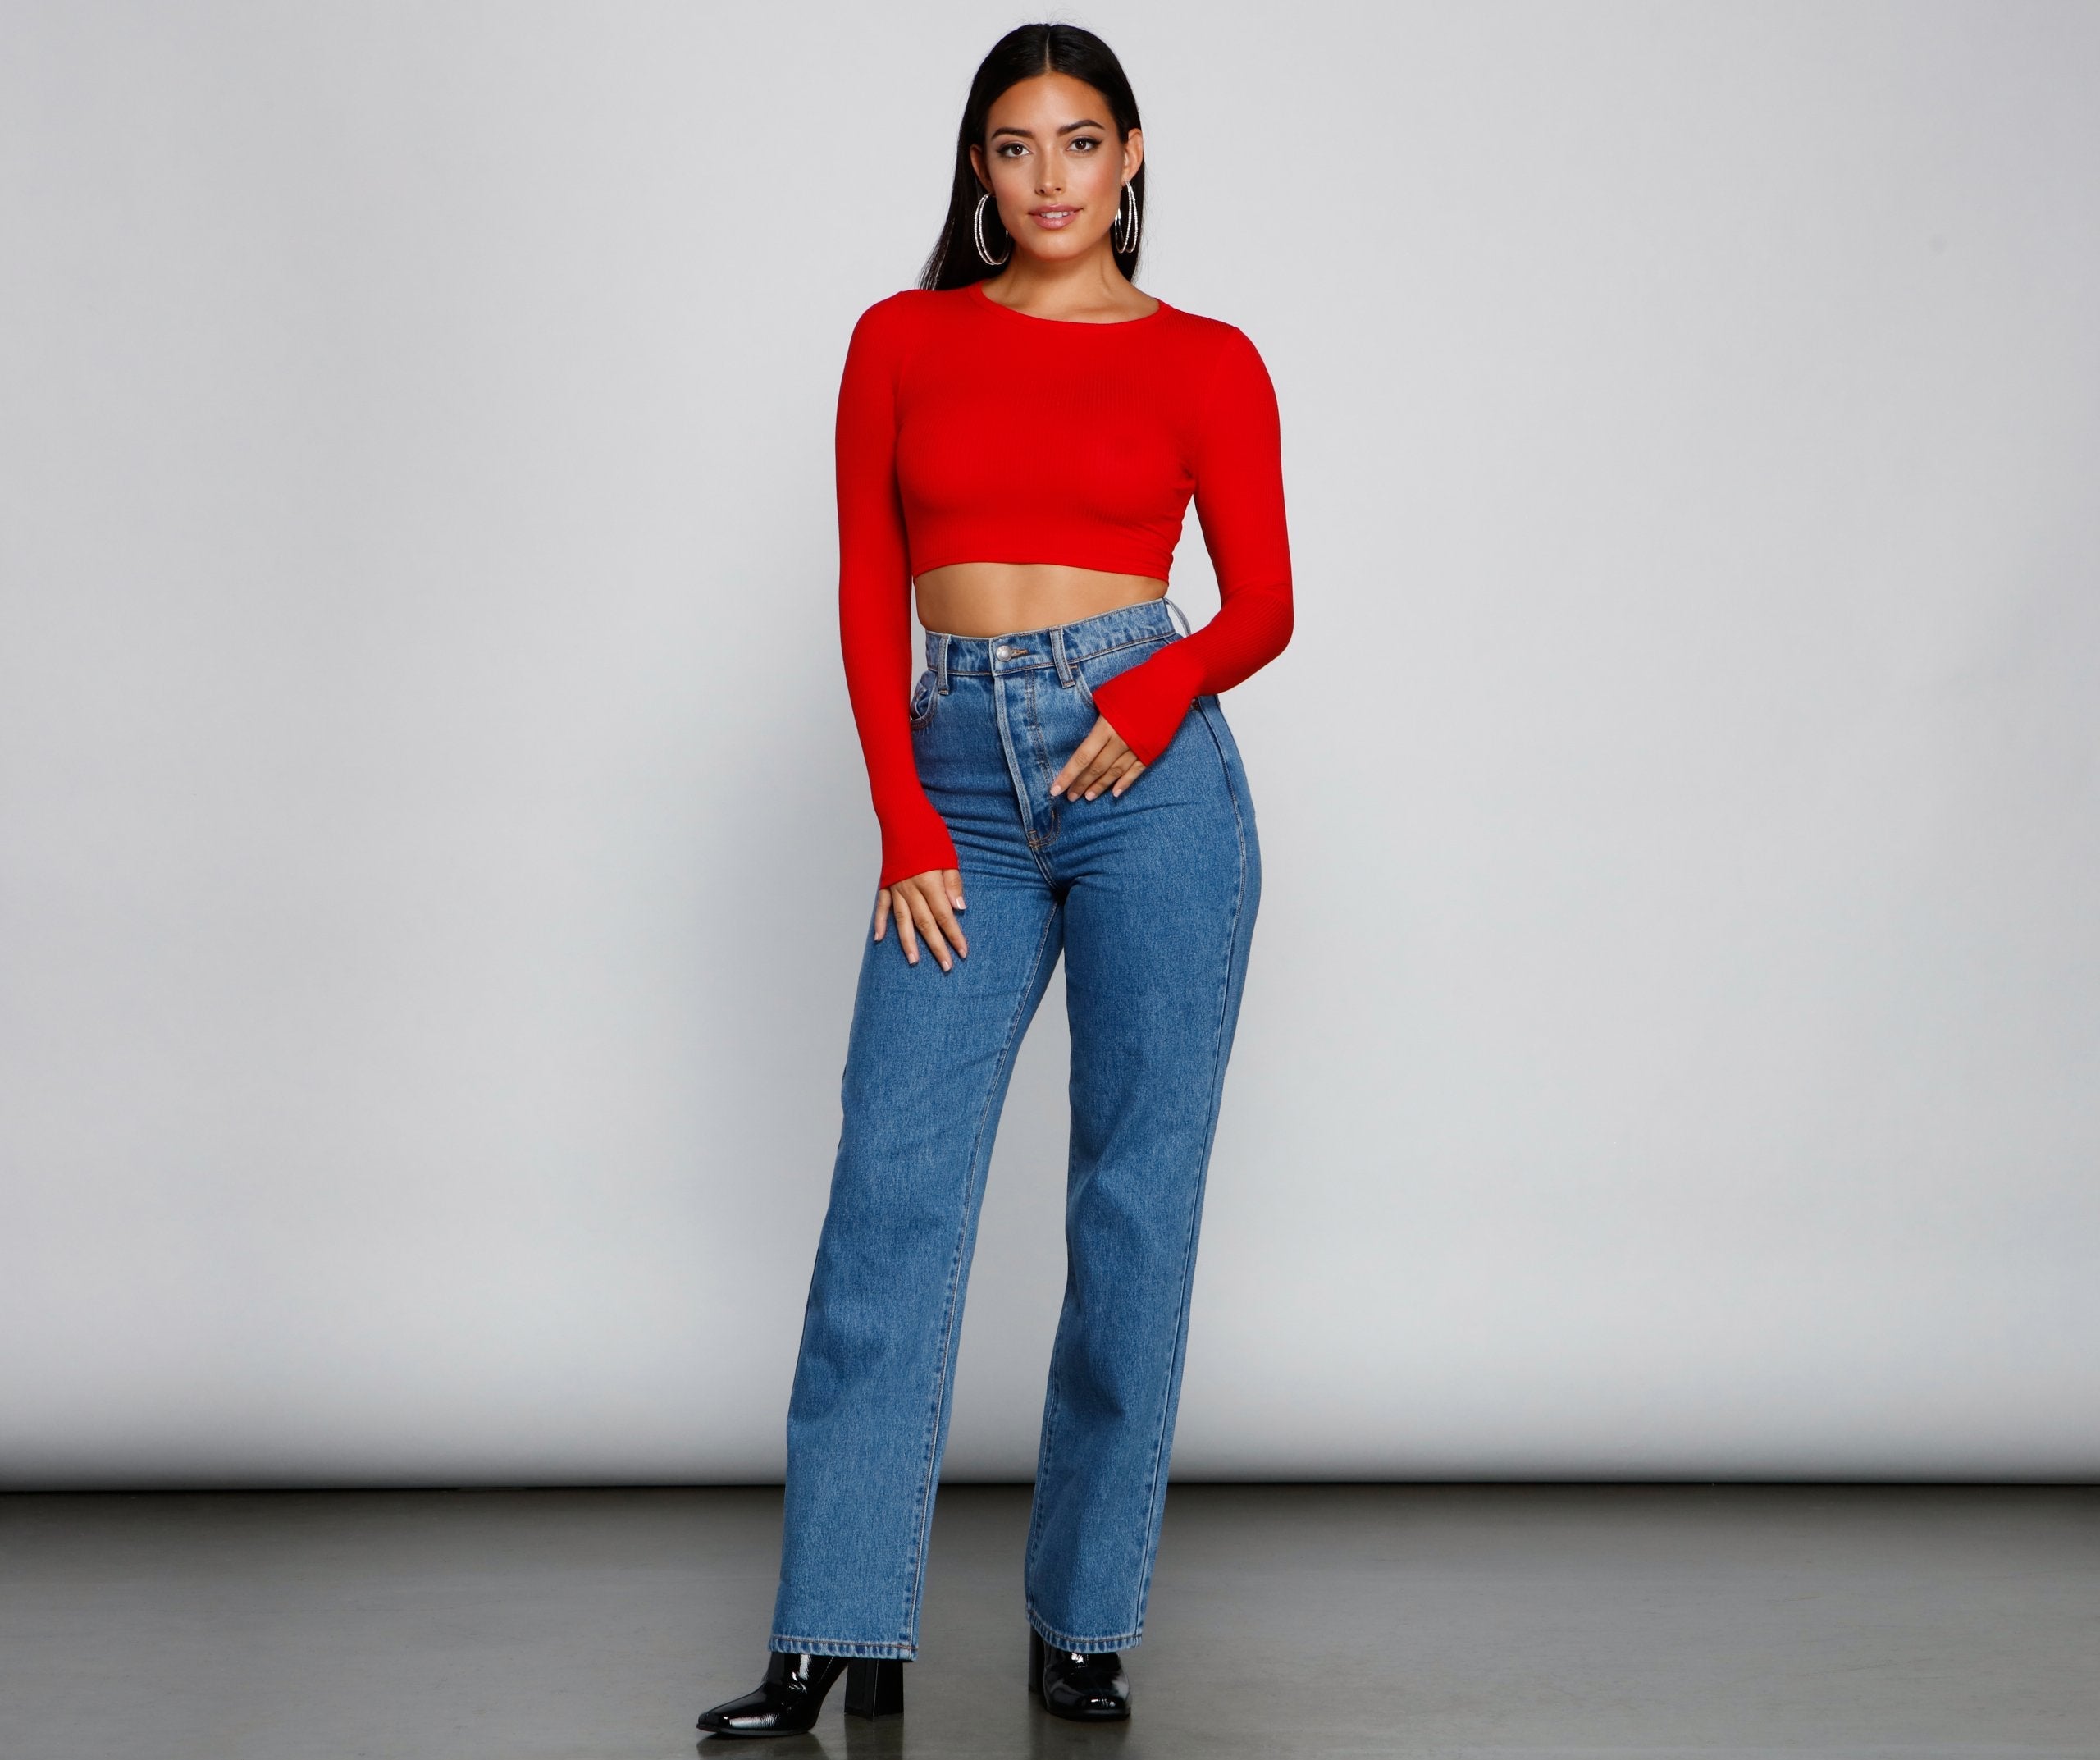 Go With It Ribbed Knit Crop Top - Lady Occasions